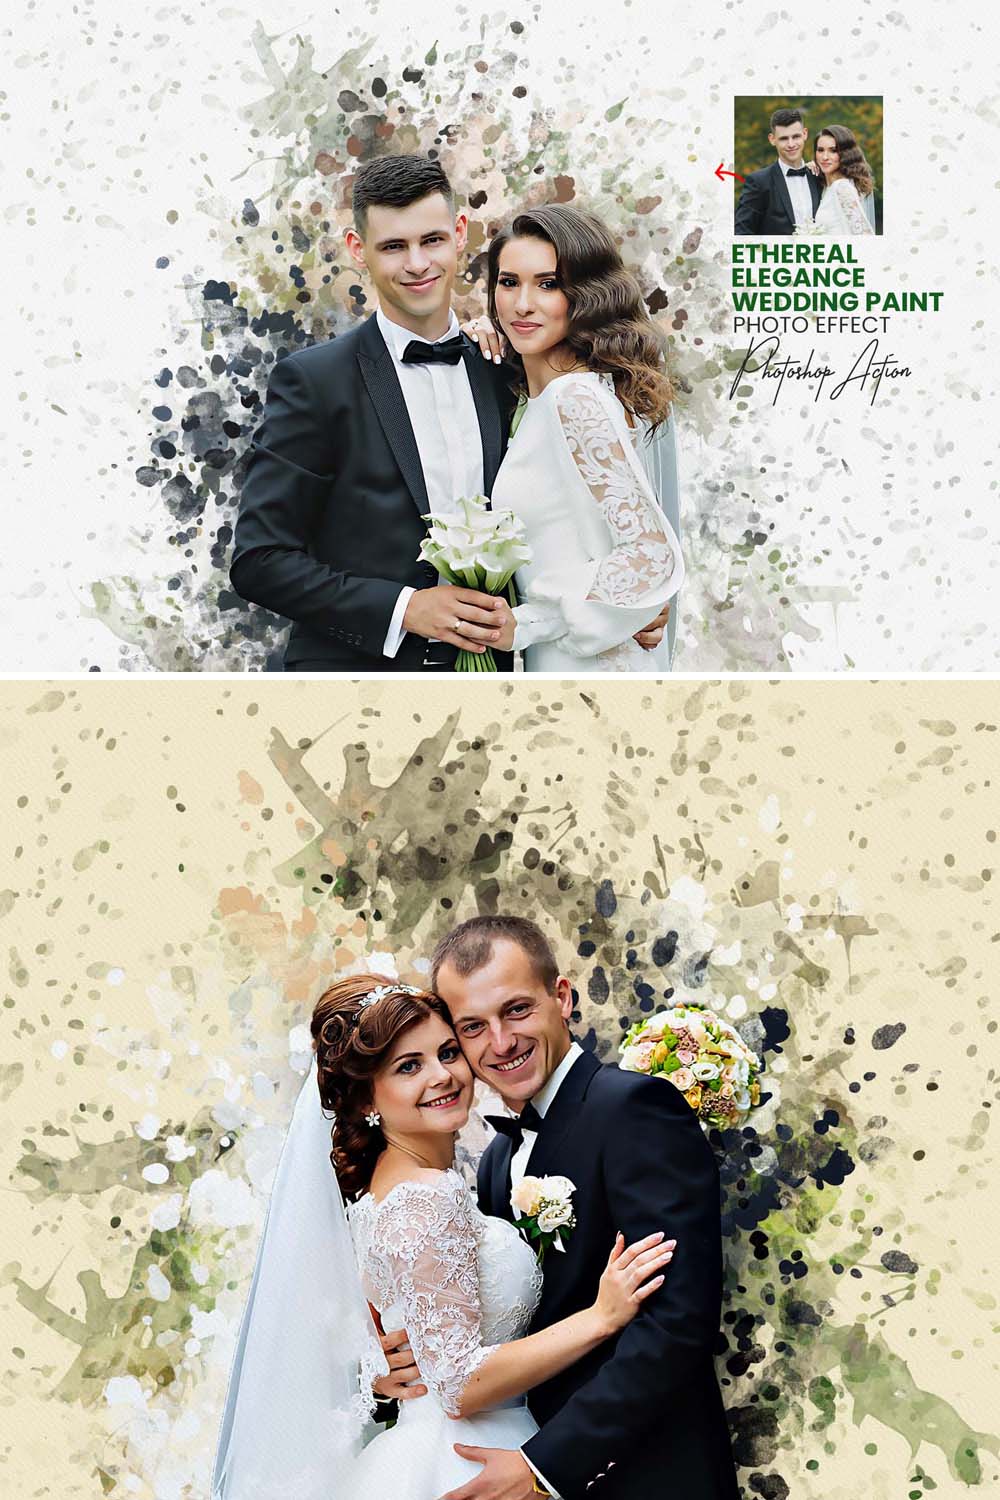 Ethereal Elegance Wedding Paint pinterest preview image.